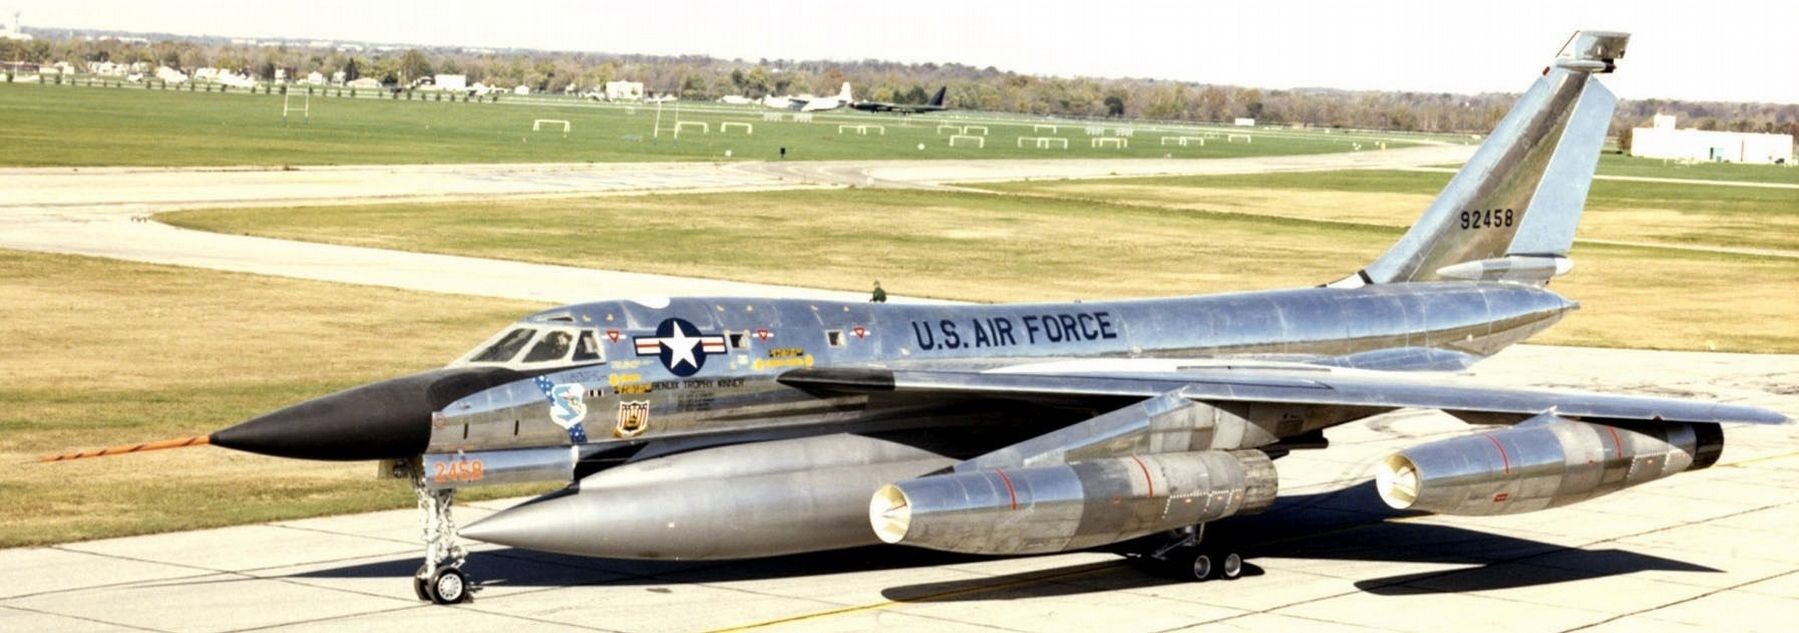 43rd Bombardment Wing Convair B-58 Hustler at the National Museum of the United States Air Force. image. Click for full size.